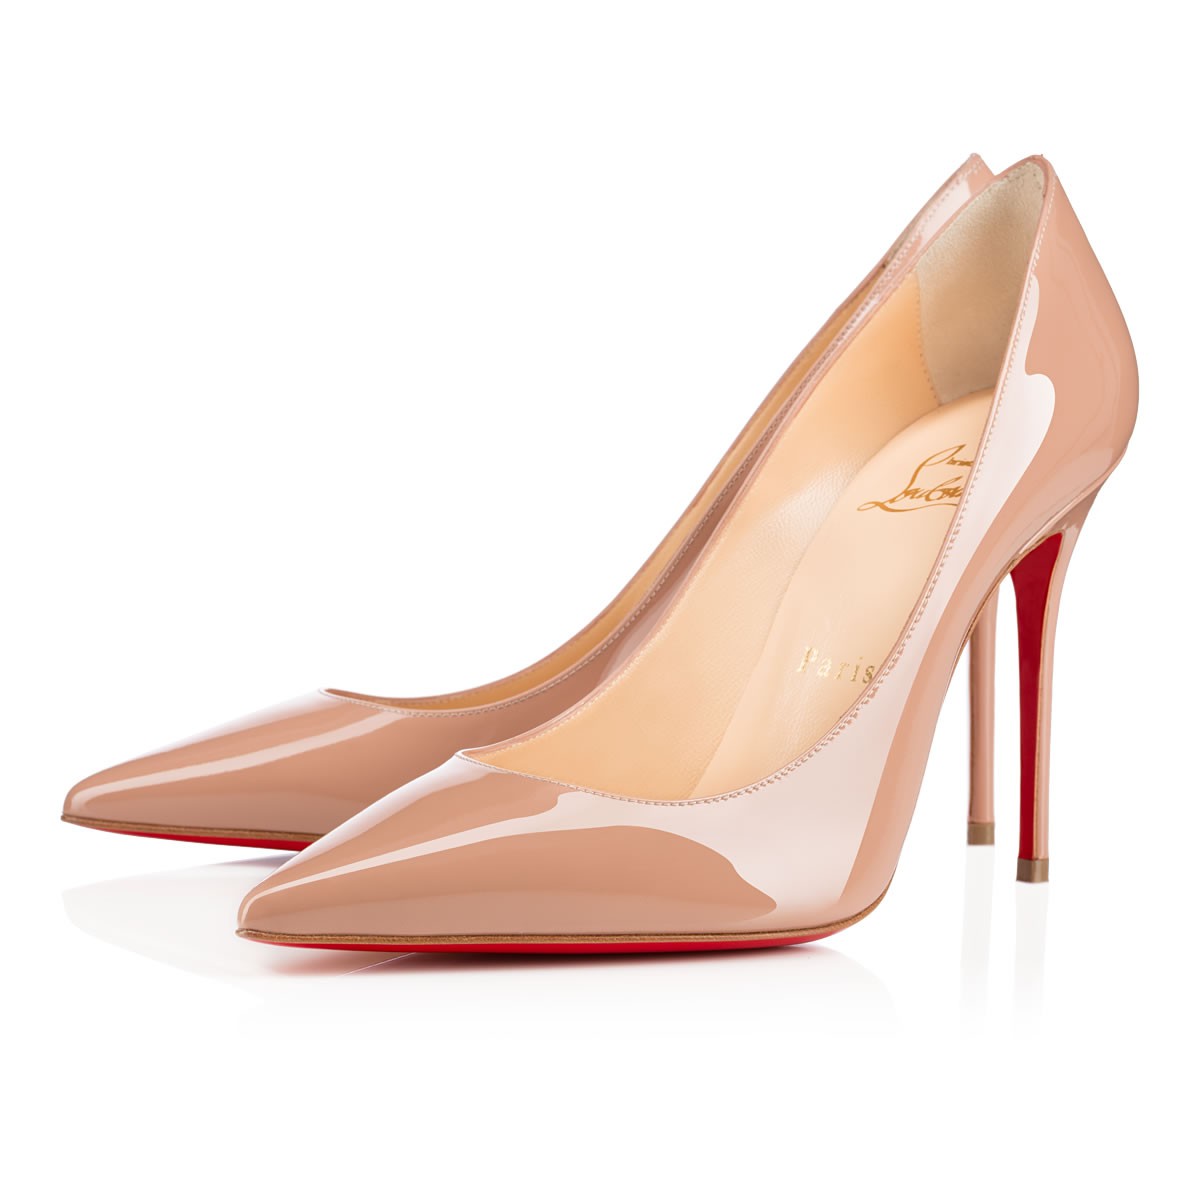 authentic red bottoms for cheap in nude color by CarmenHeel.com